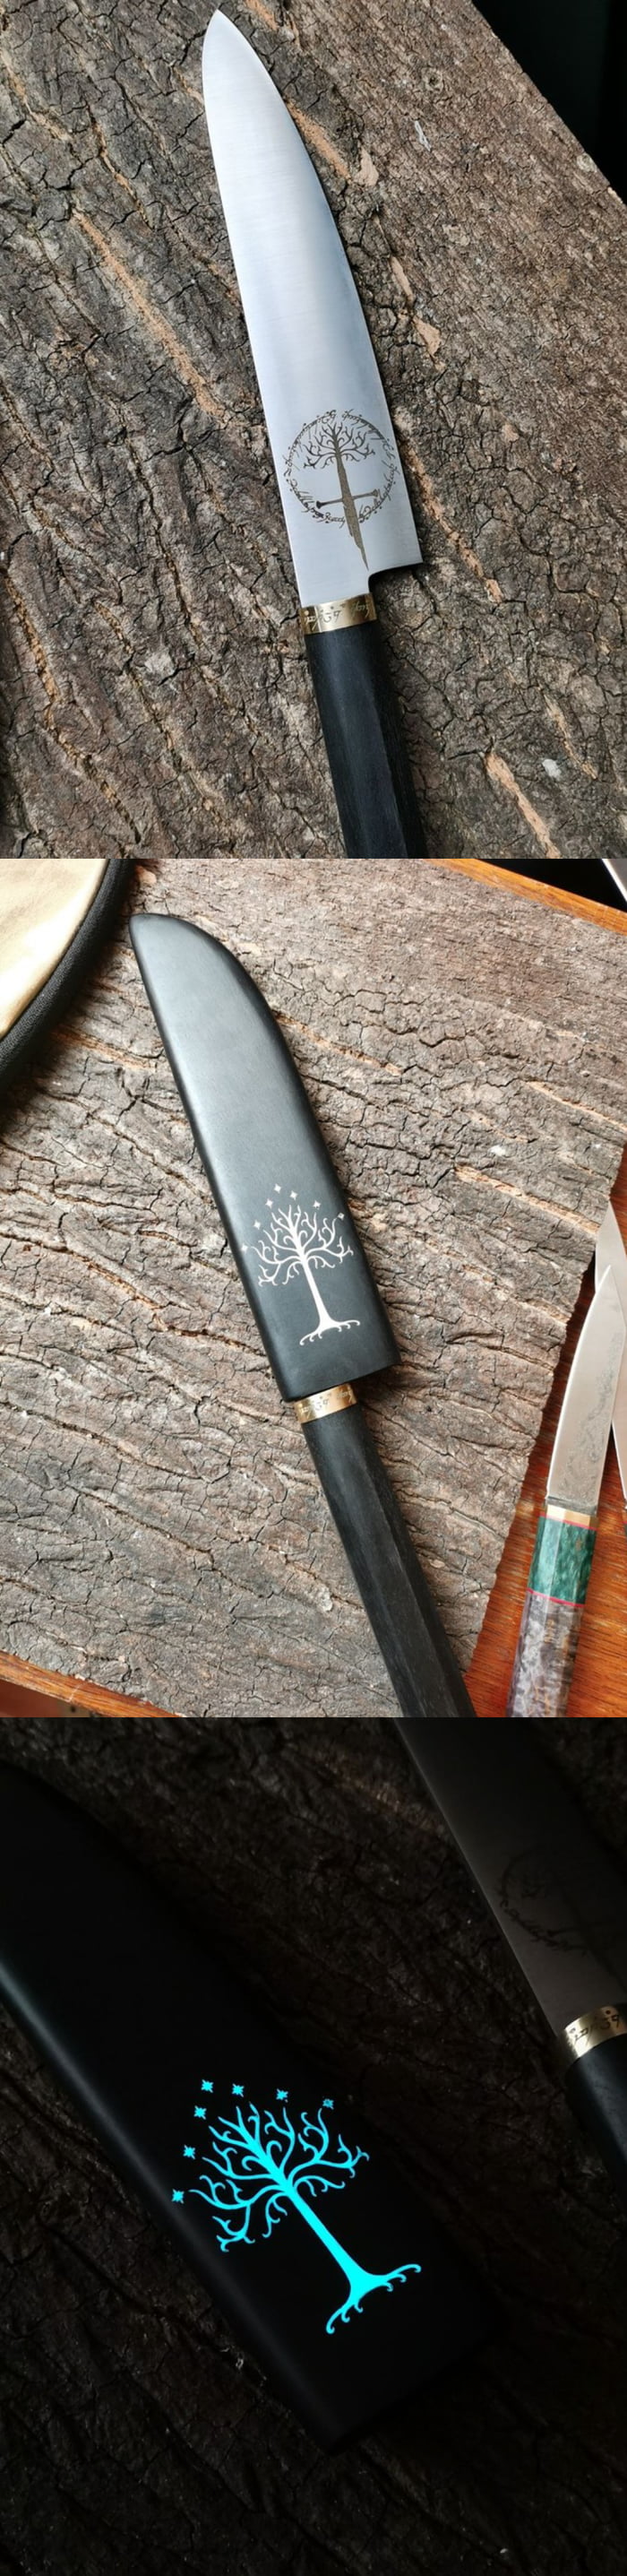 Made this knife for a LOTR fan. The wooden scabbard made wit